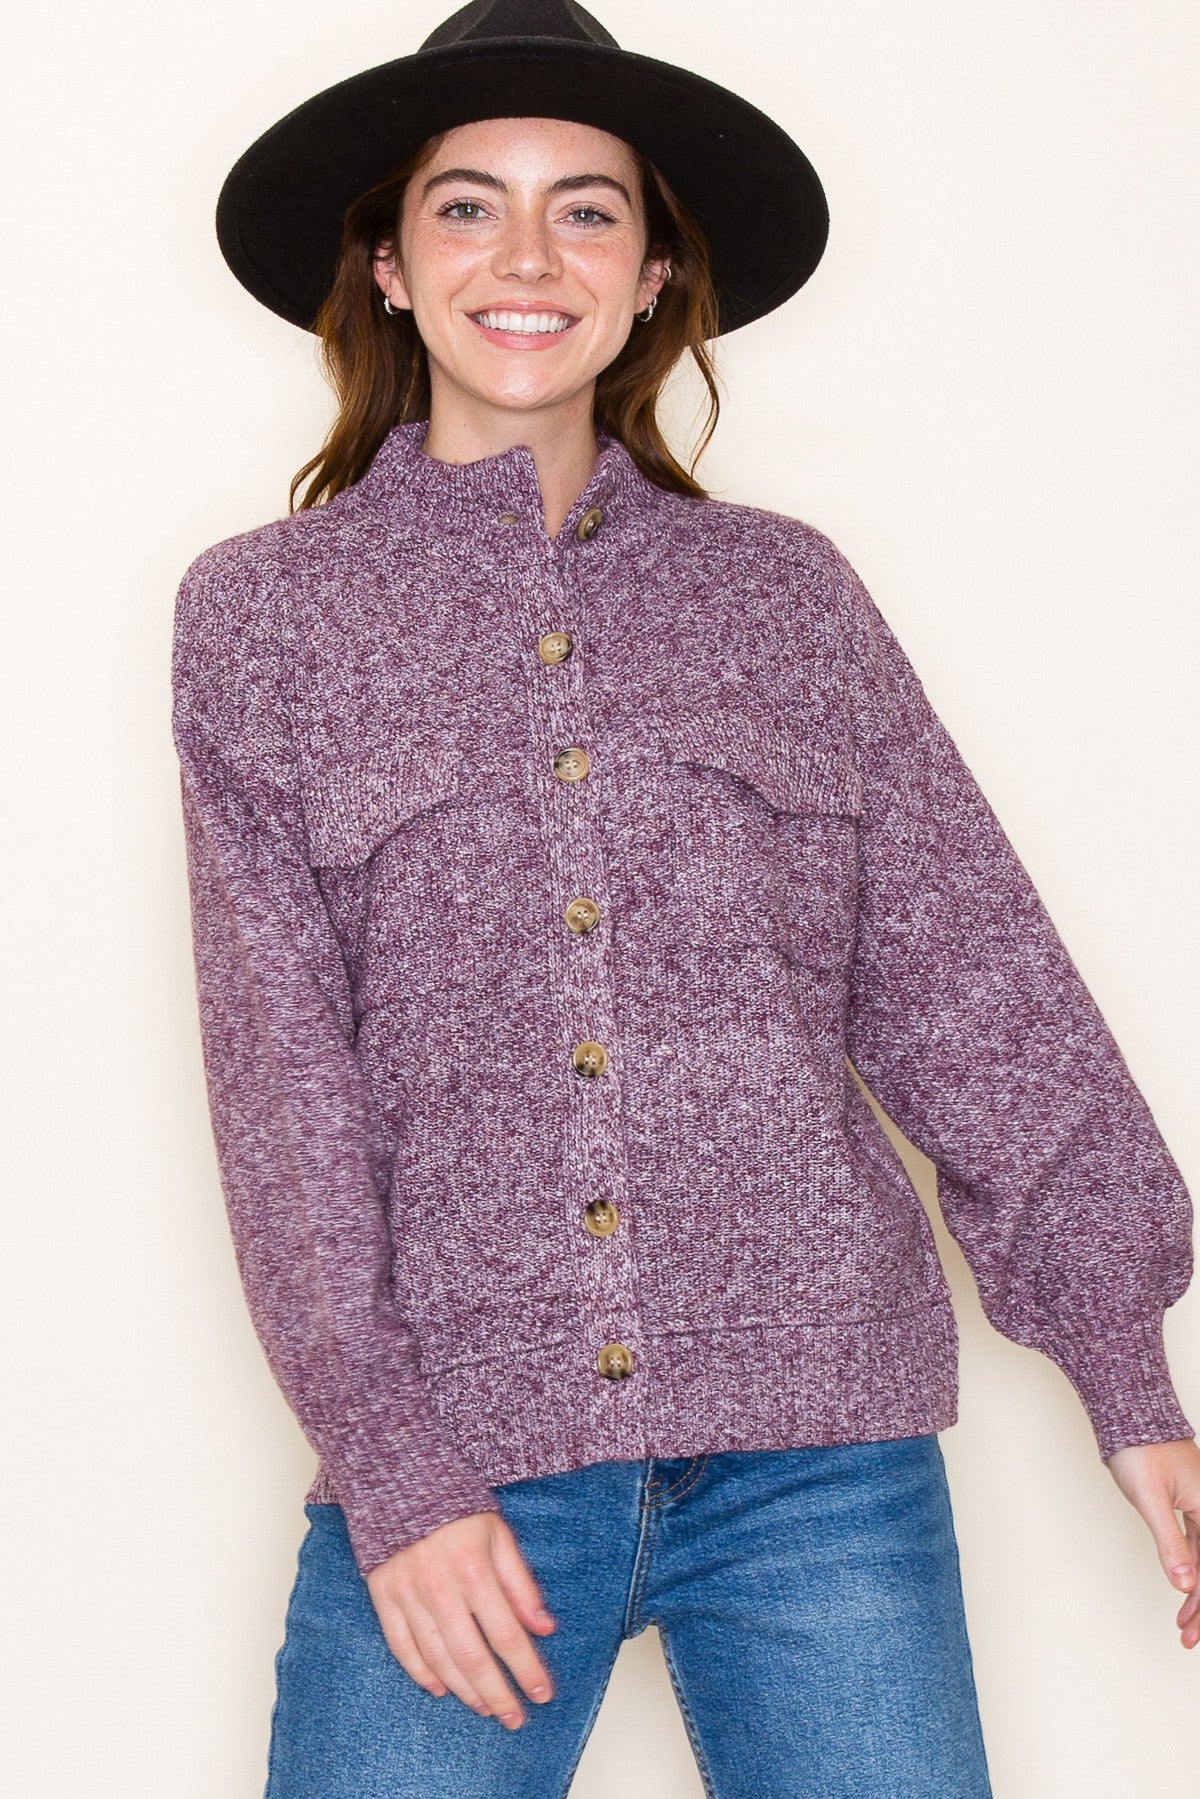 Kim Textured Chest Pocket Sweater cardigan | Two Tone Purple buttoned